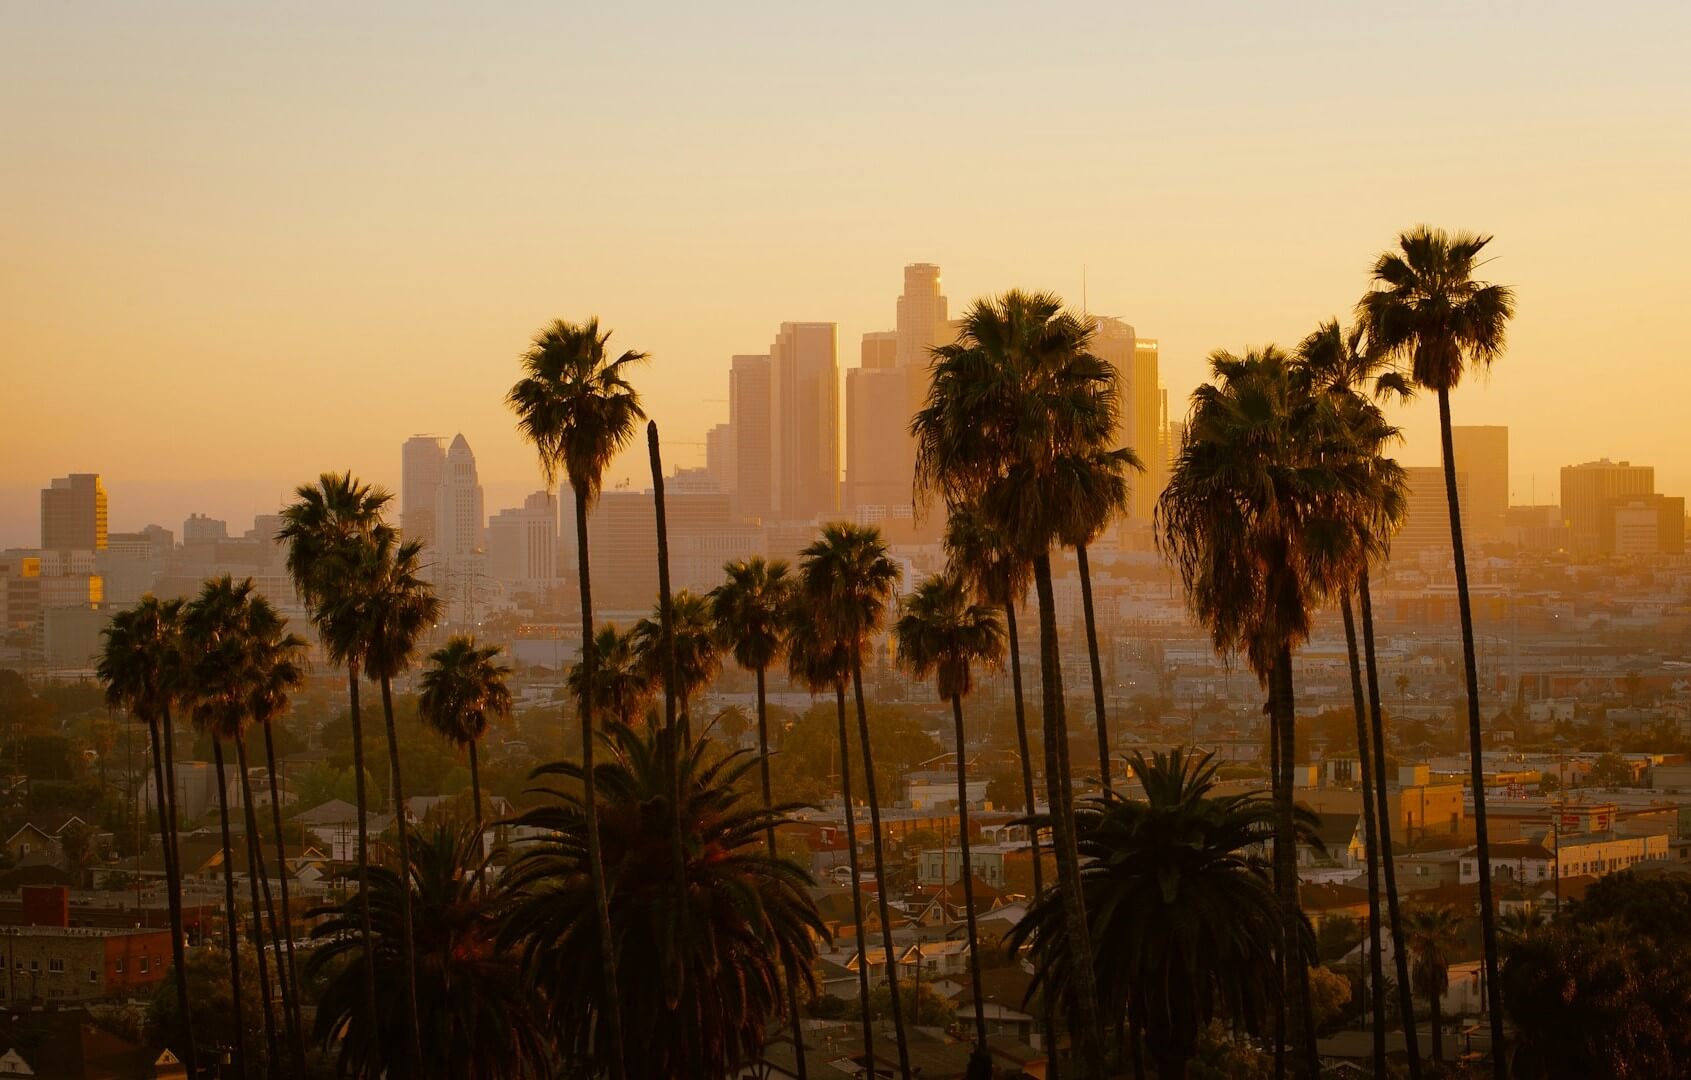 Dance Studios Los Angeles - Palm Trees with city skyline in rear